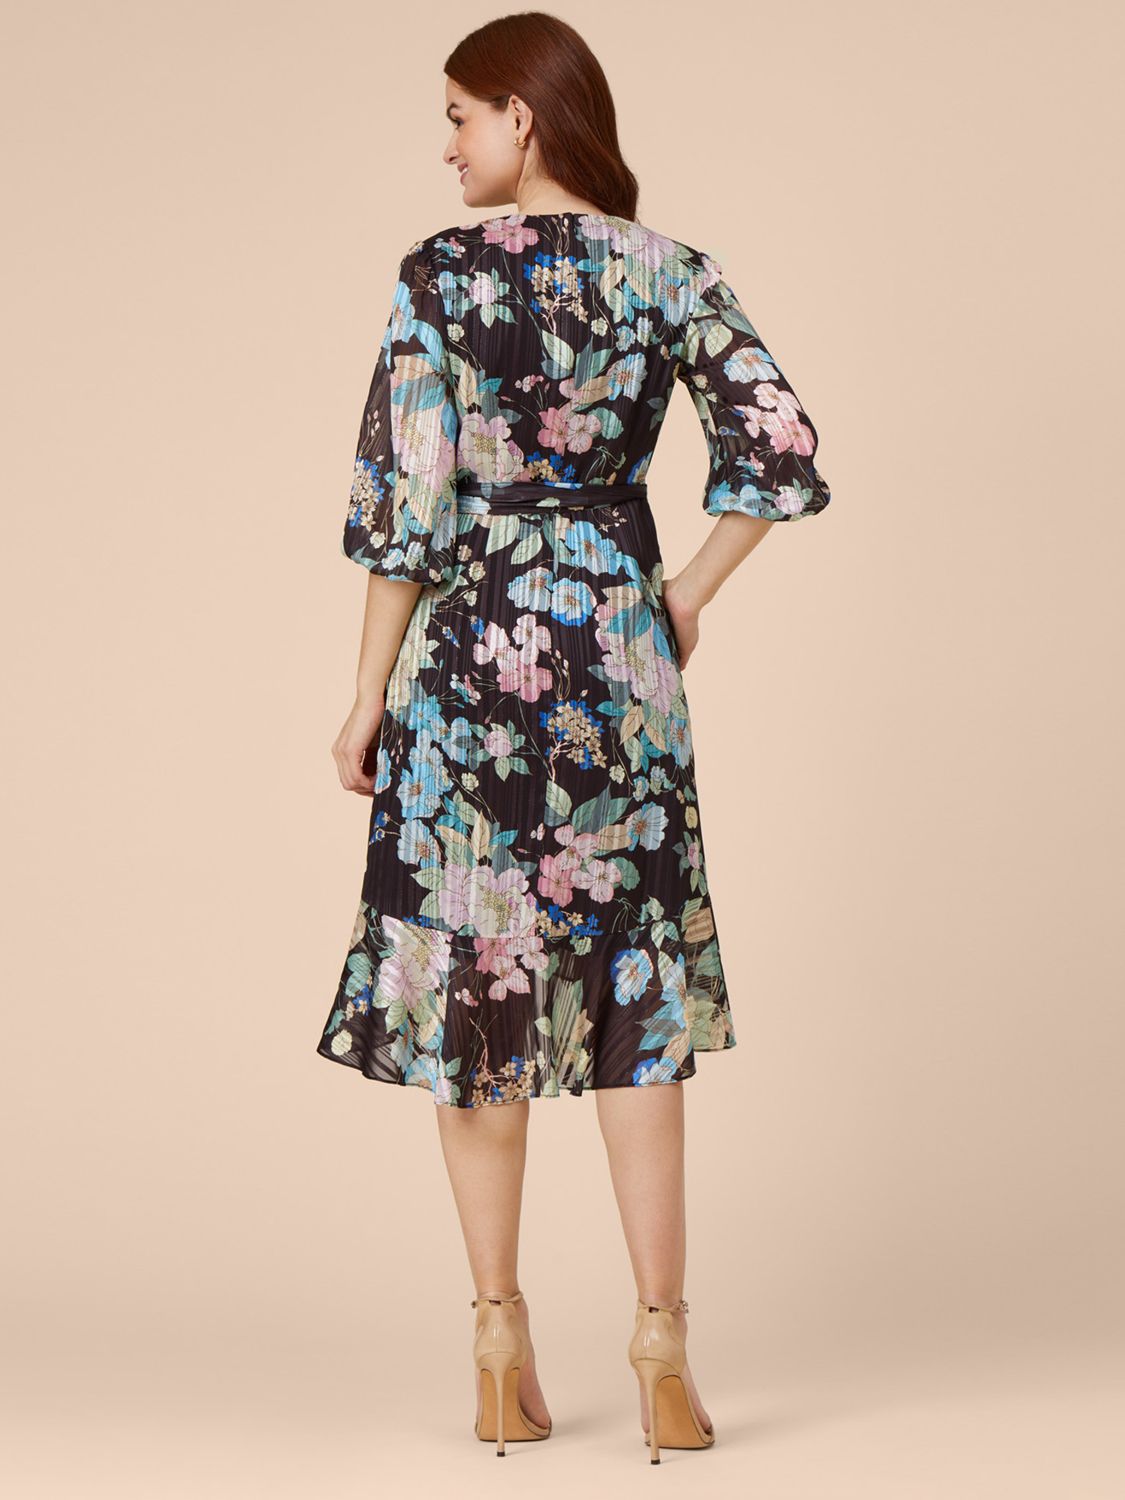 Buy Adrianna Papell Floral Chiffon Wrap Dress, Black/Multi Online at johnlewis.com